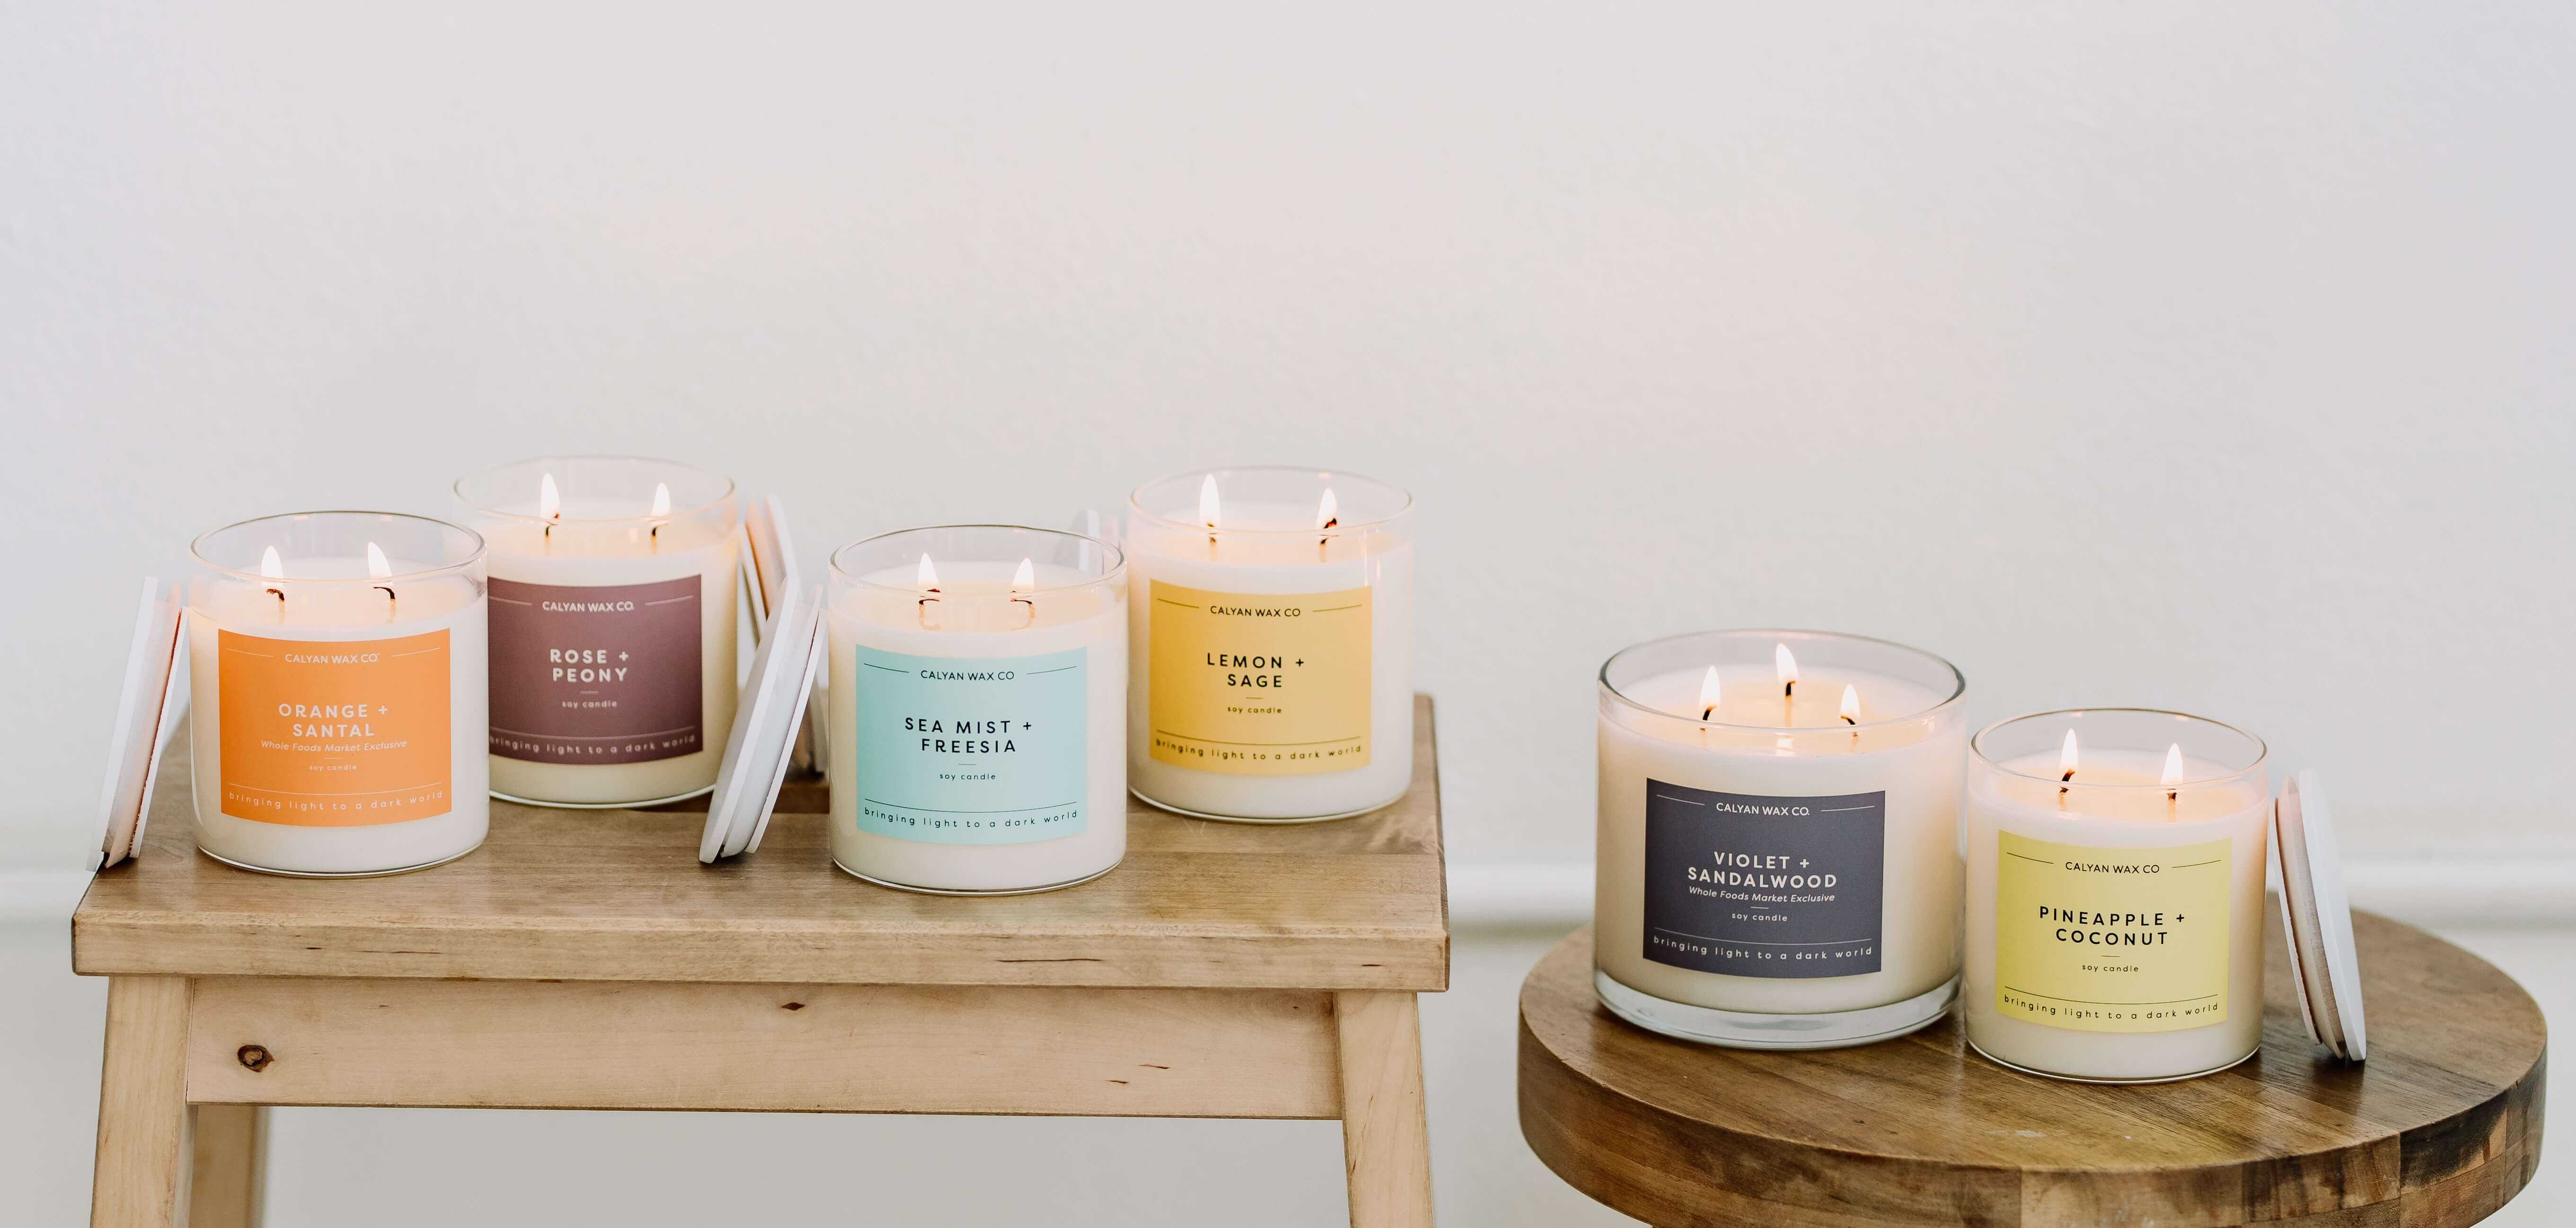 whole foods candles spring and summer.jpg__PID:0eb36885-930a-46e4-a7d6-5c547bb0770f